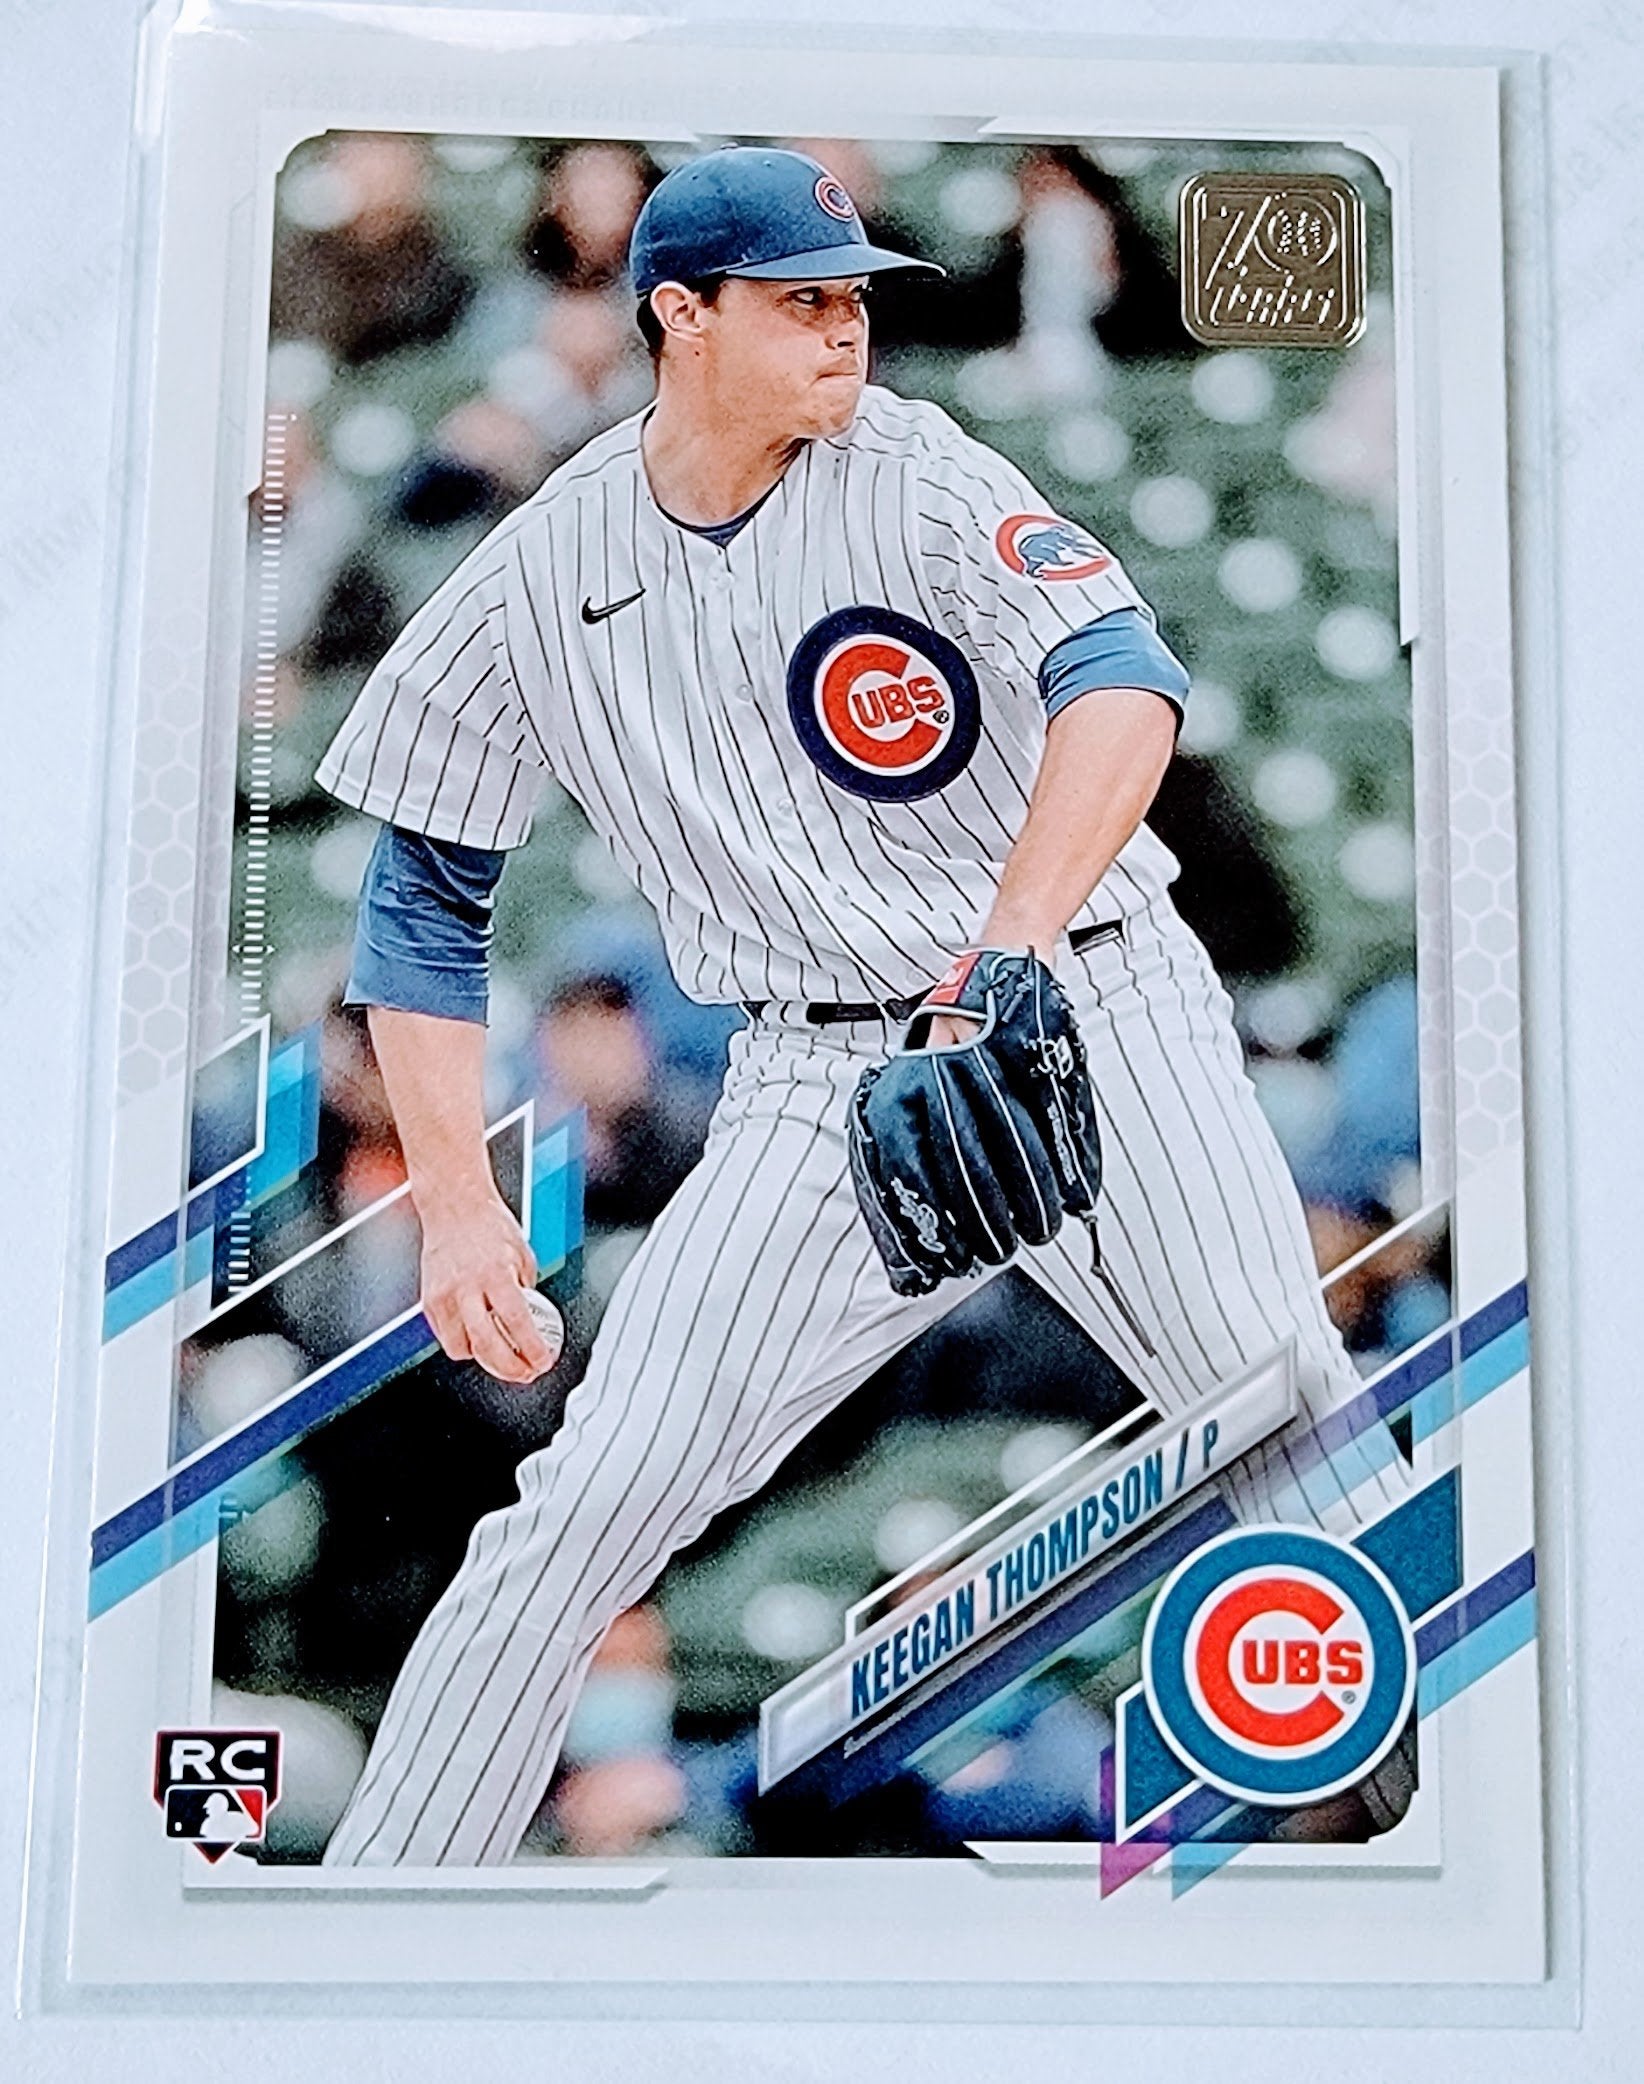 2021 Topps Update Keegan Thompson Rookie Baseball Trading Card SMCB1 simple Xclusive Collectibles   